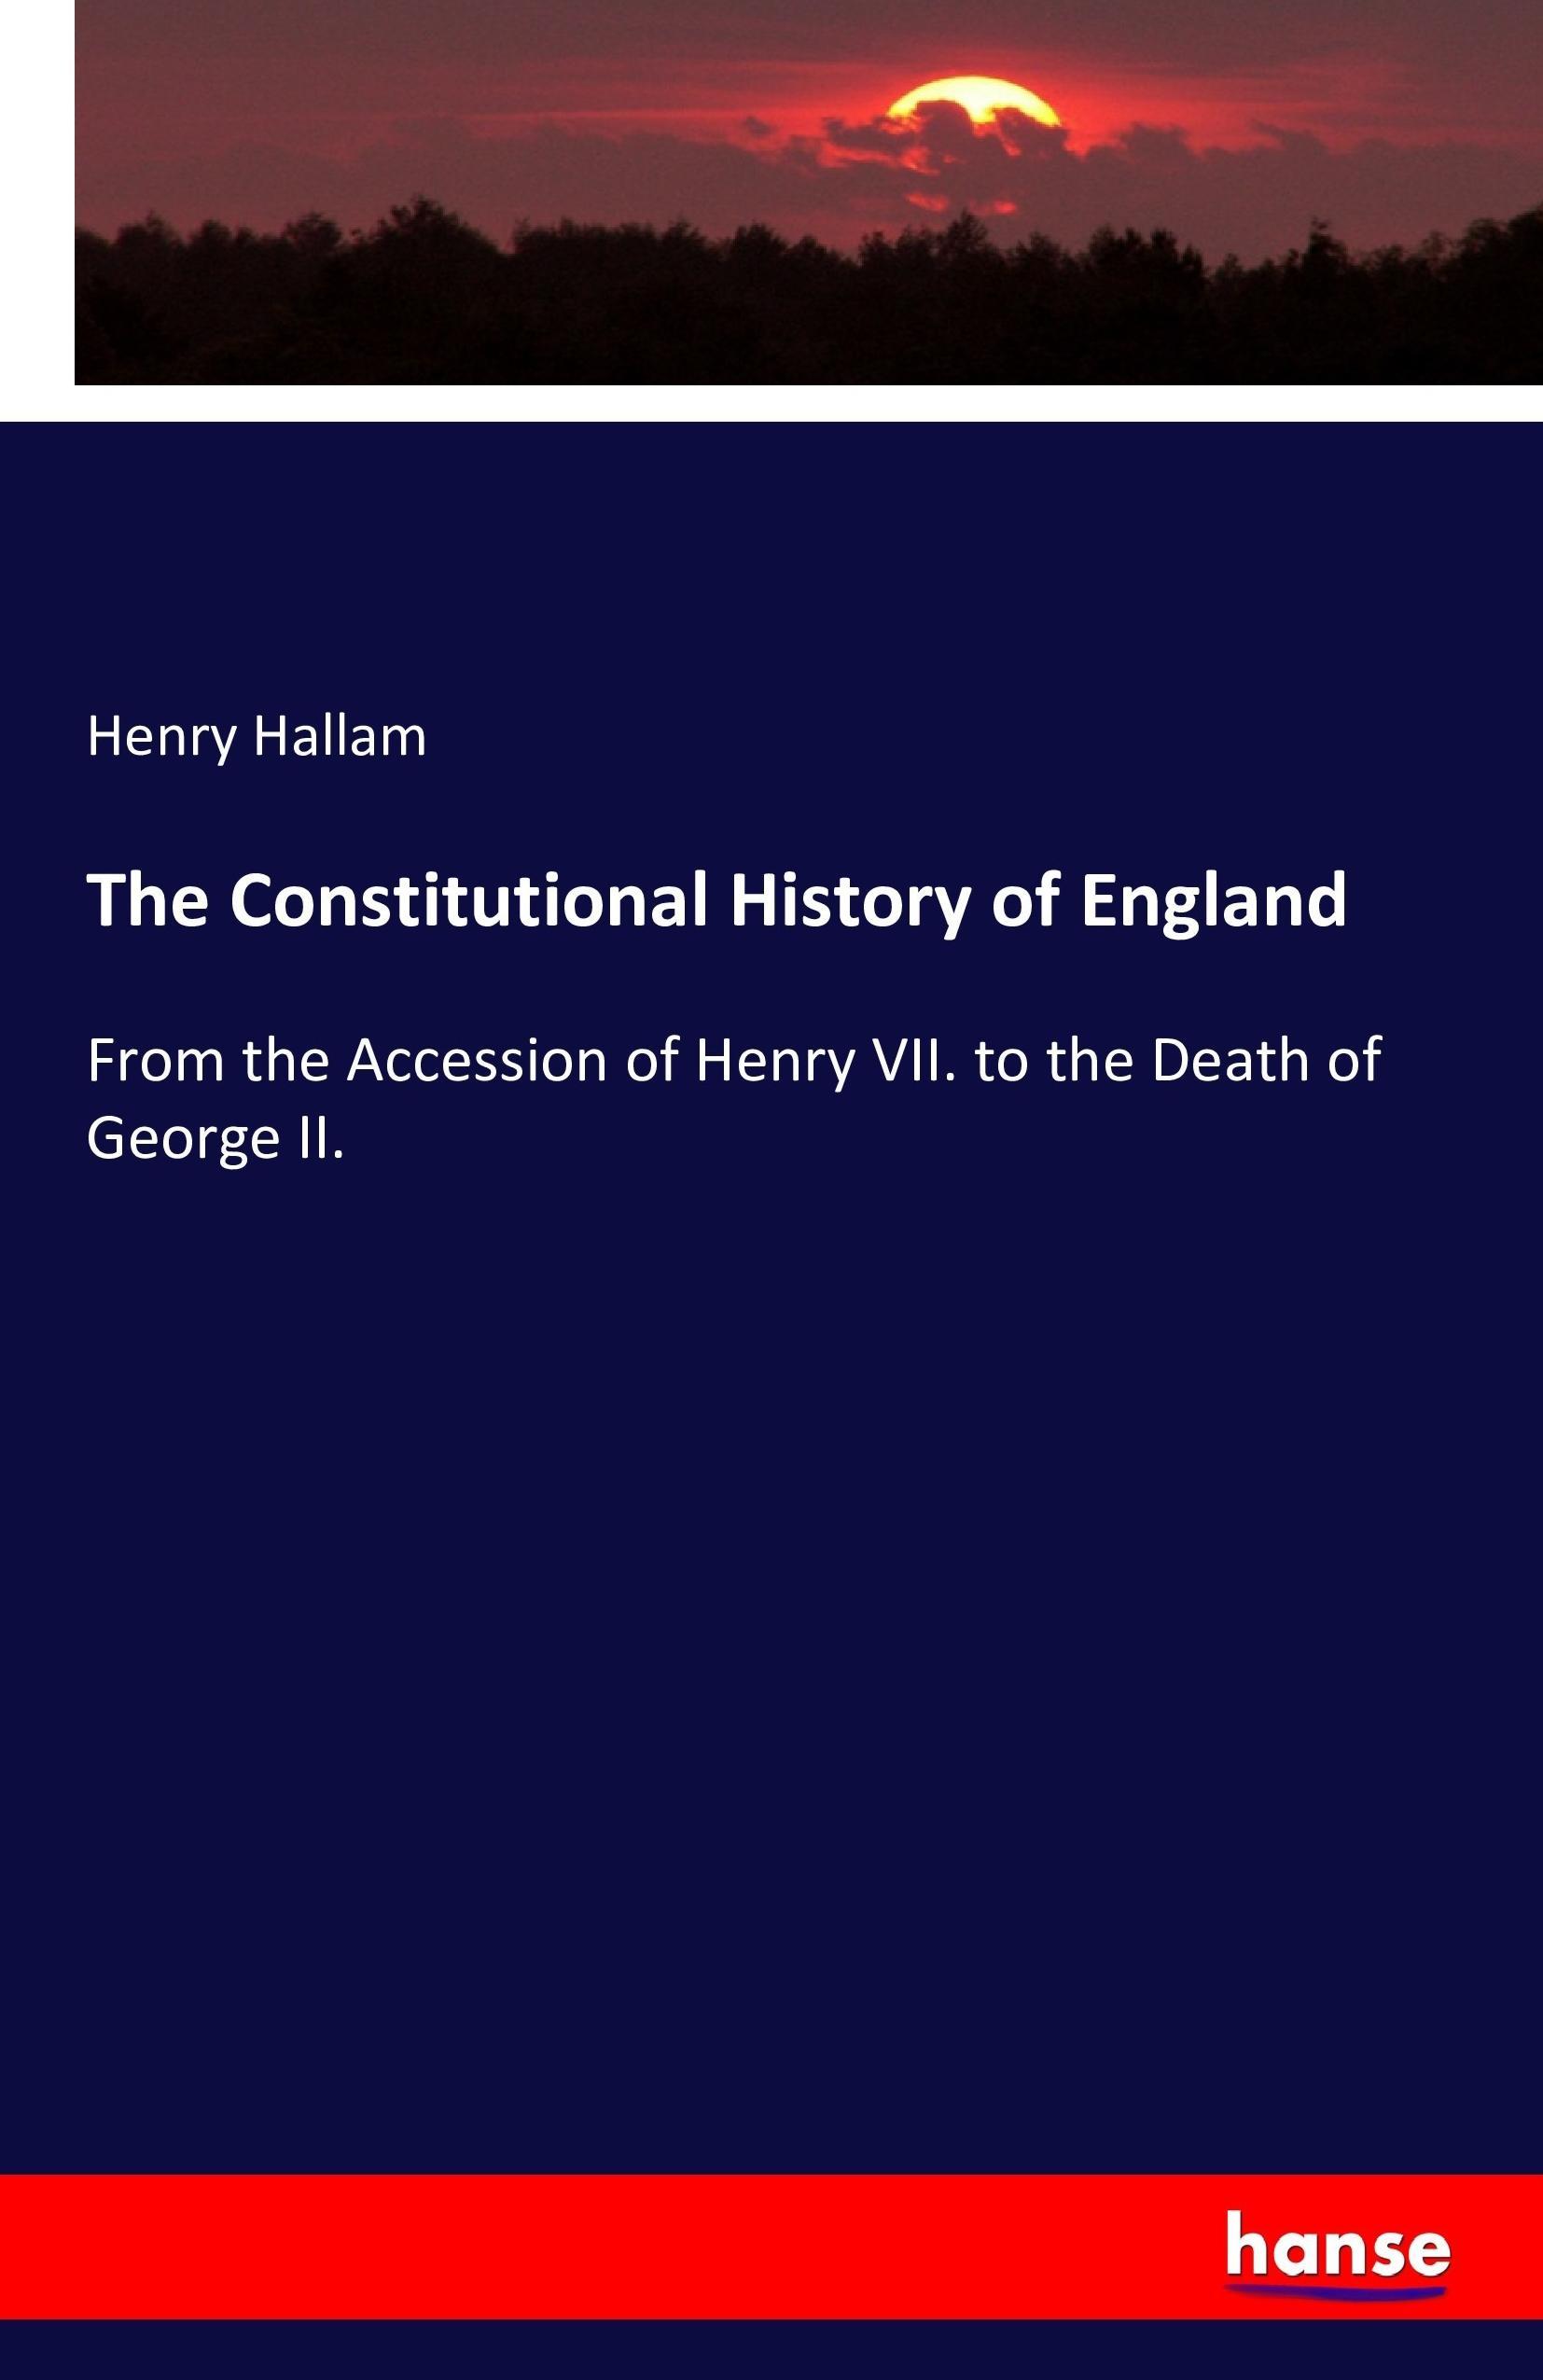 The Constitutional History of England - Hallam, Henry